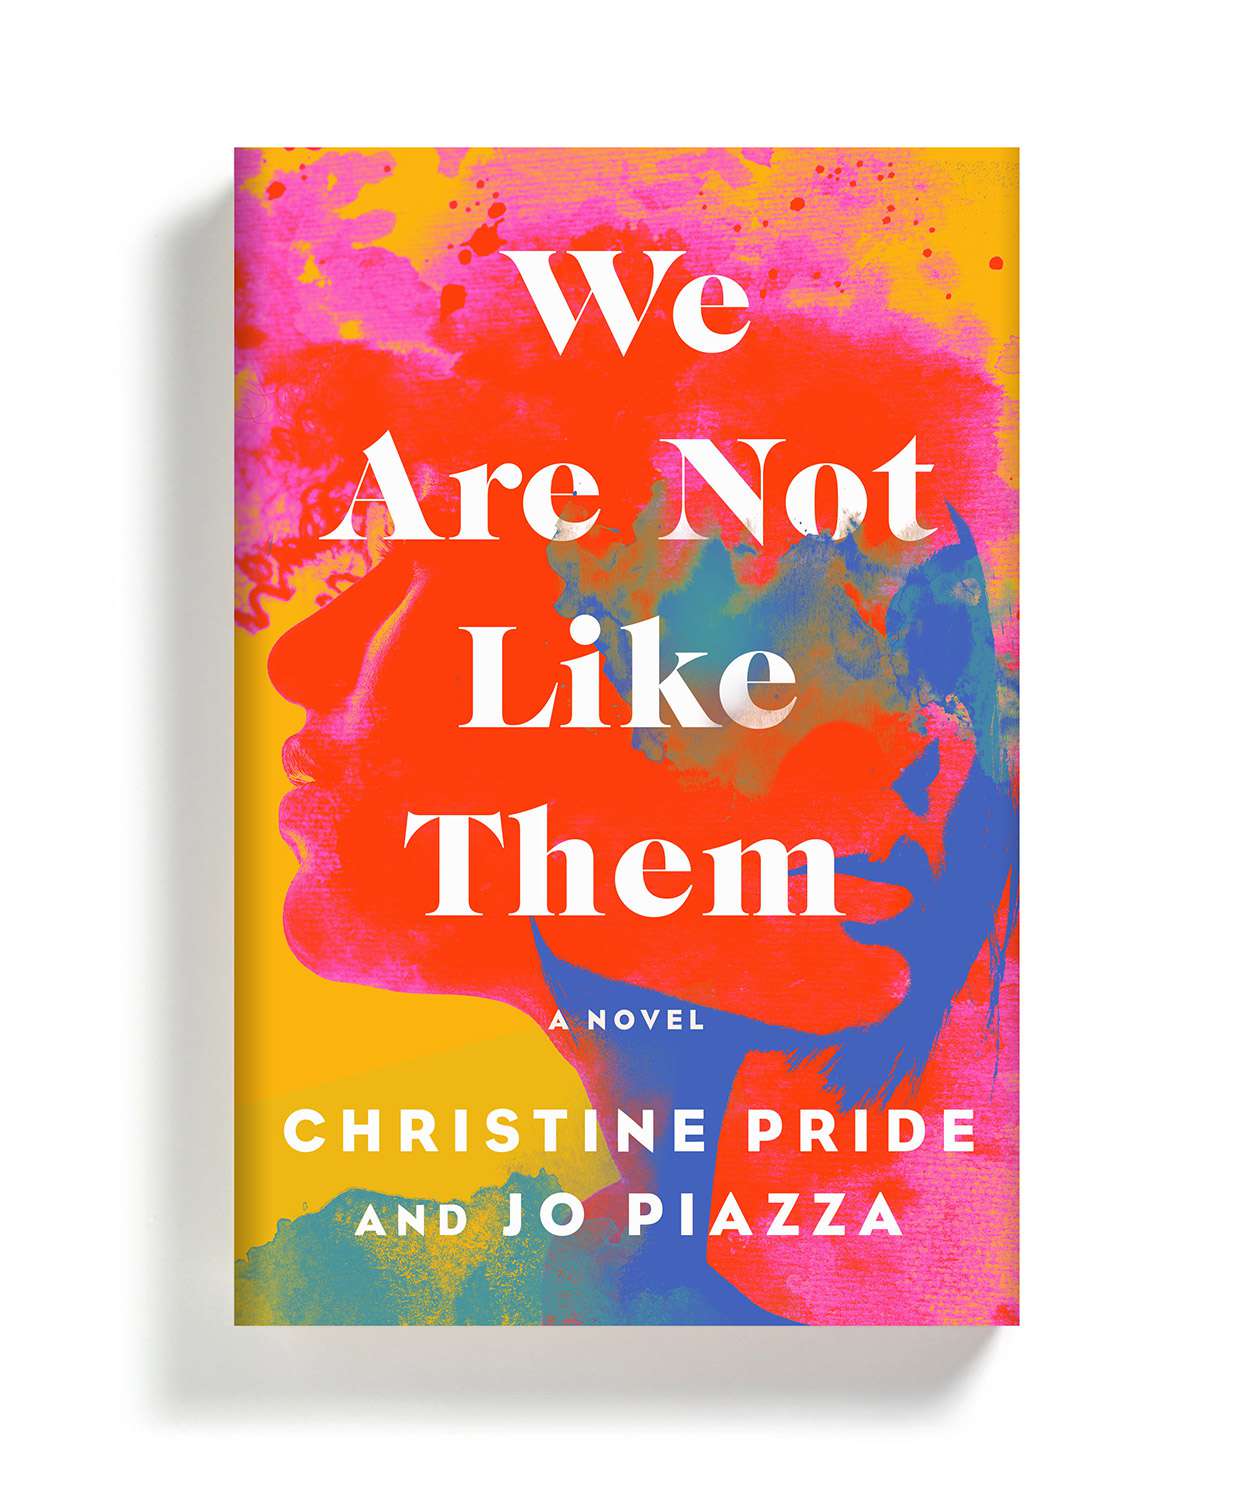 We Are Not Like Them by Jo Piazza and Christine Pride